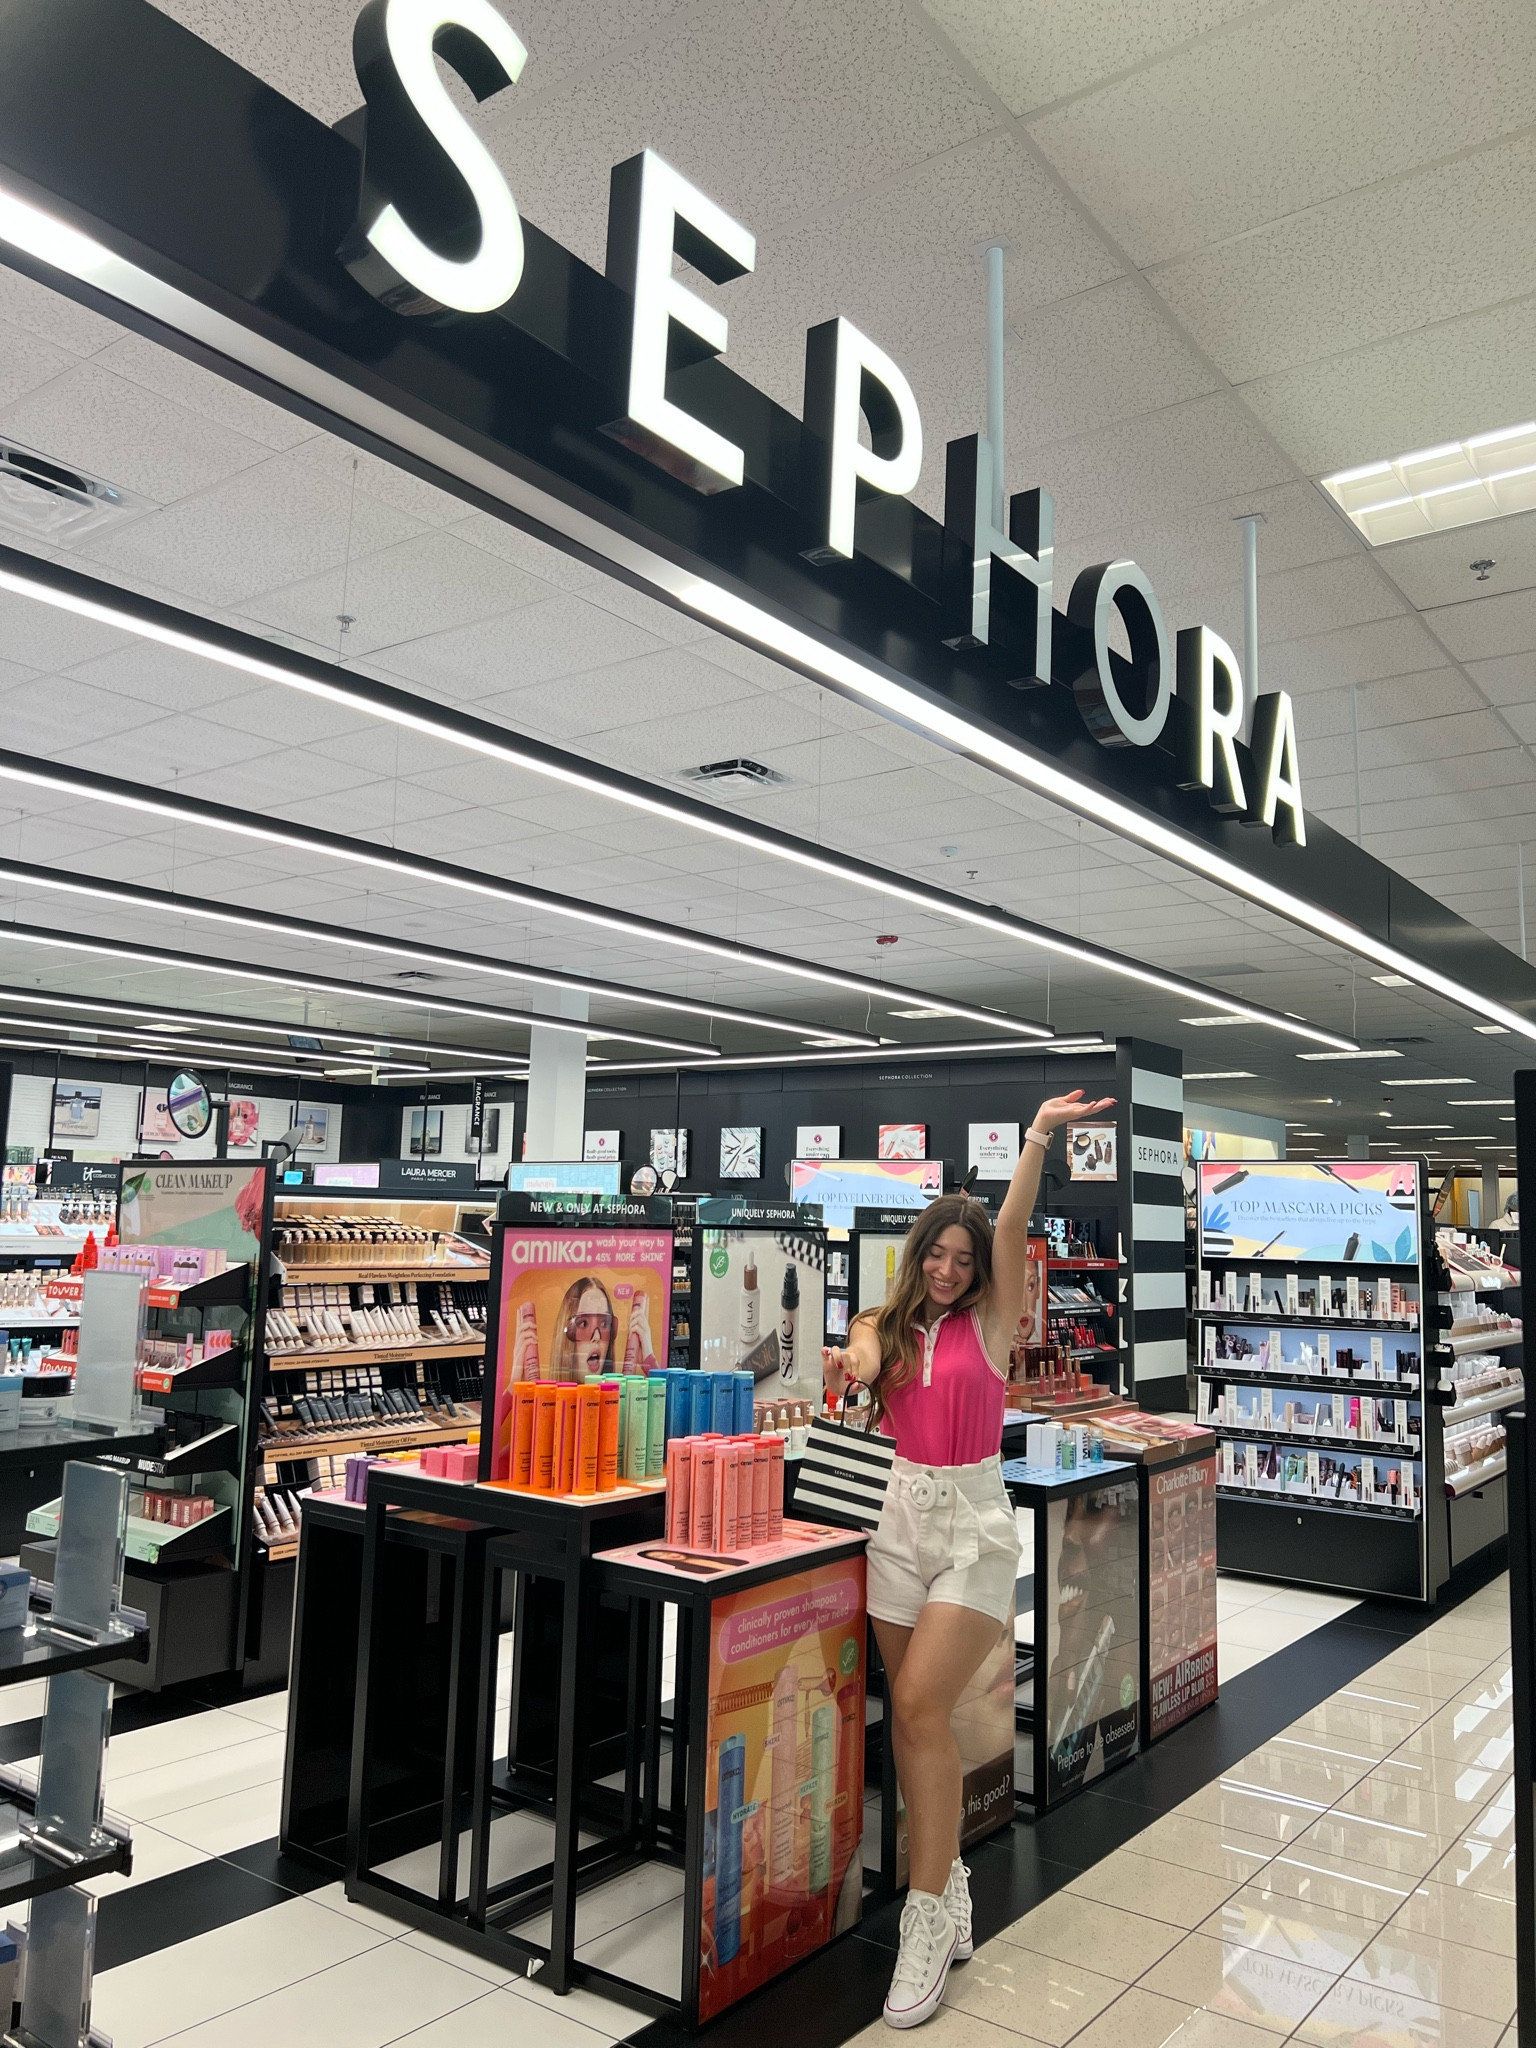 New releases at Sephora inside JCPenney!